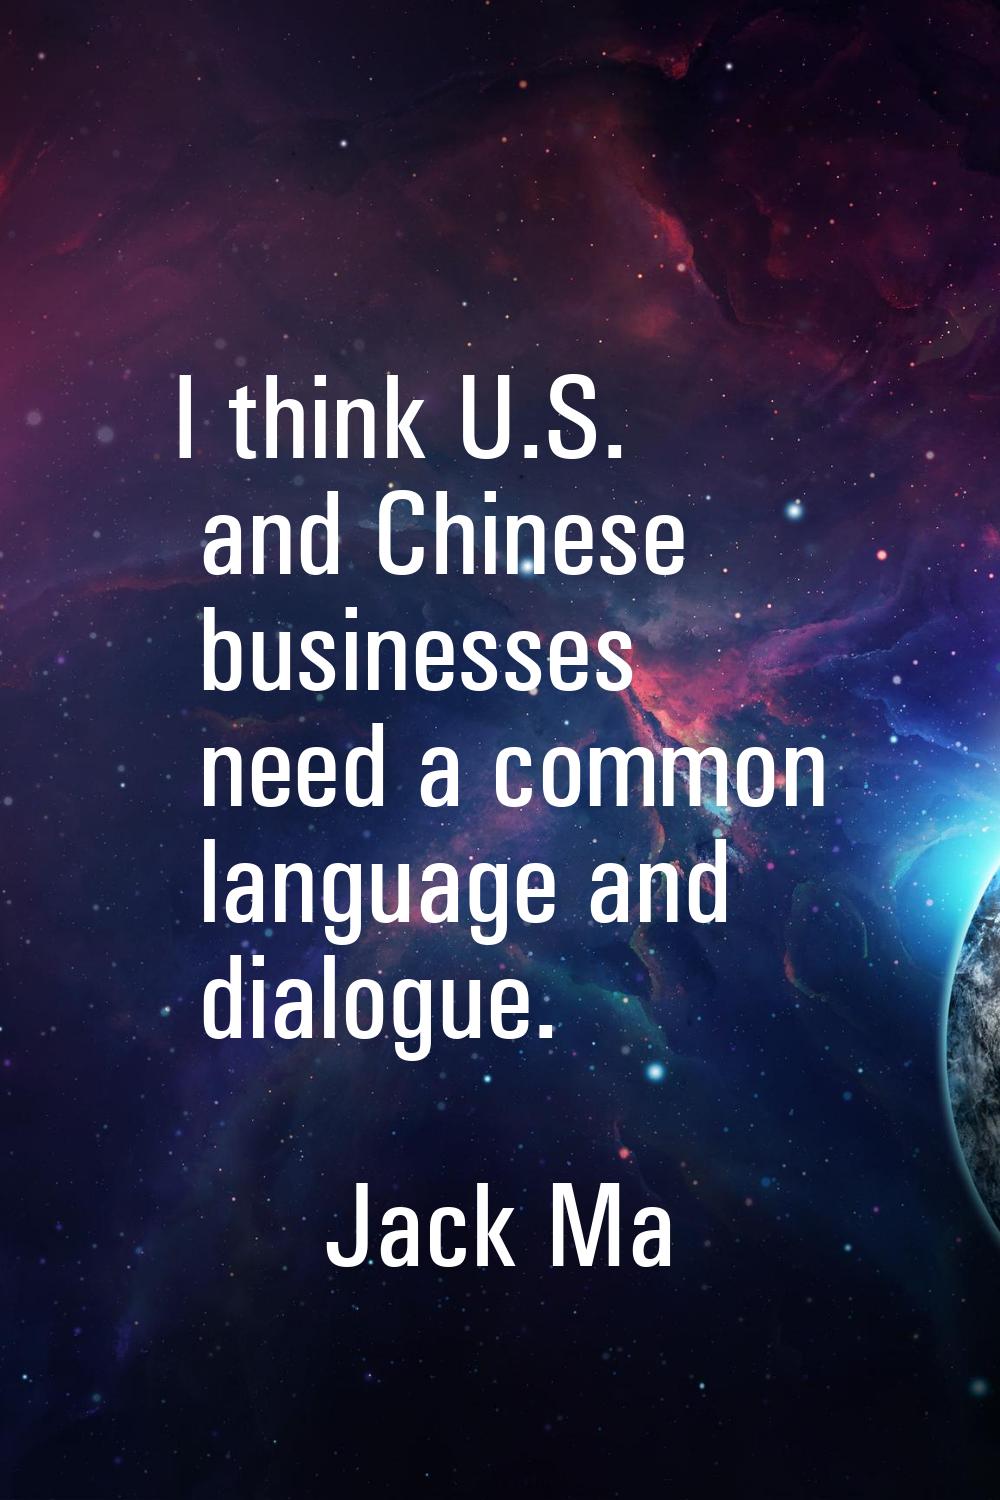 I think U.S. and Chinese businesses need a common language and dialogue.